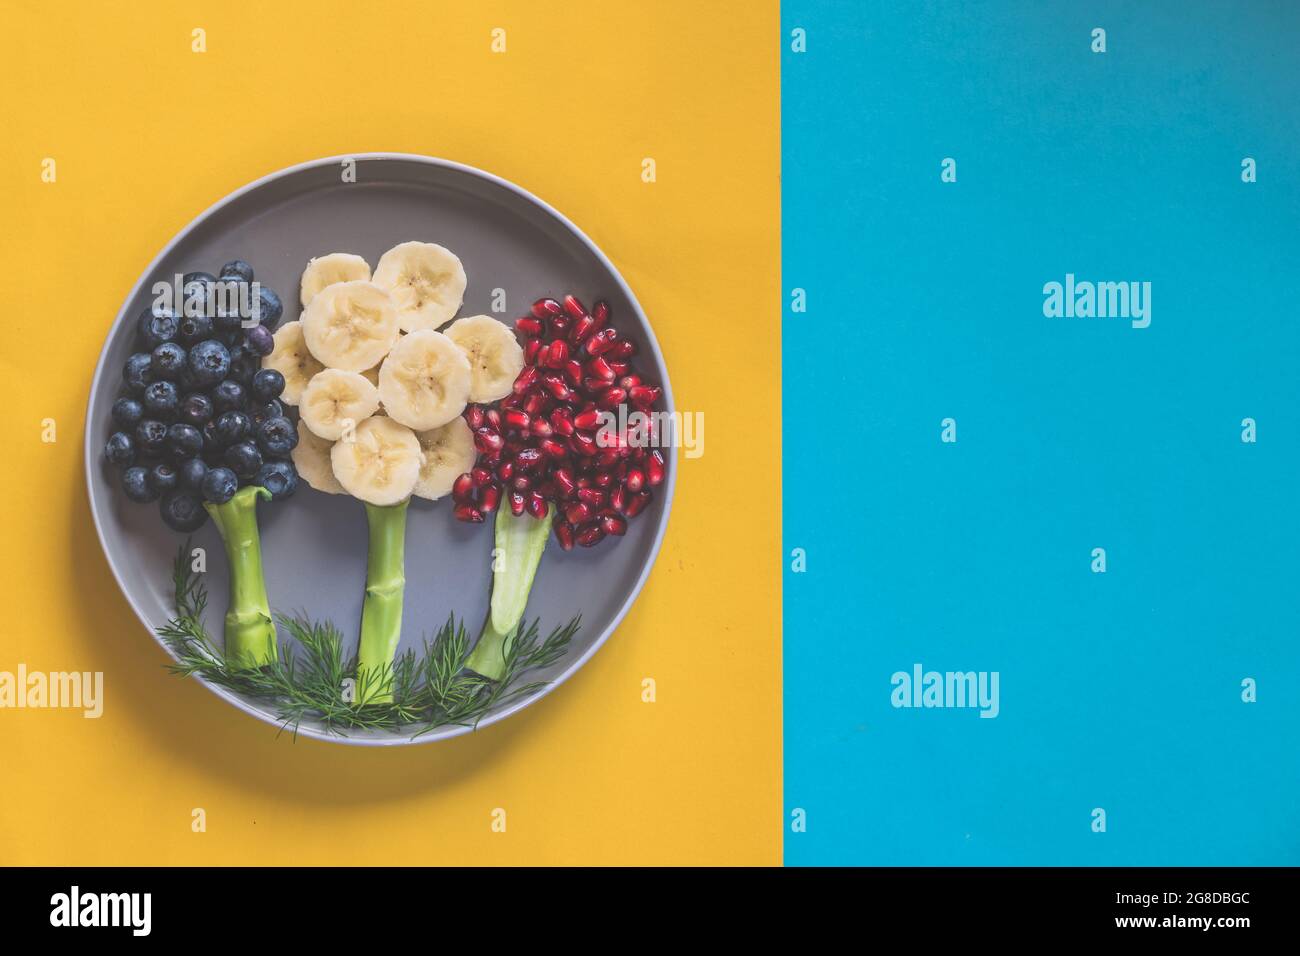 fruit trees on the plate made from banana, blueberries, pomegranate apples isolated on blue and yellow backgrounds Stock Photo